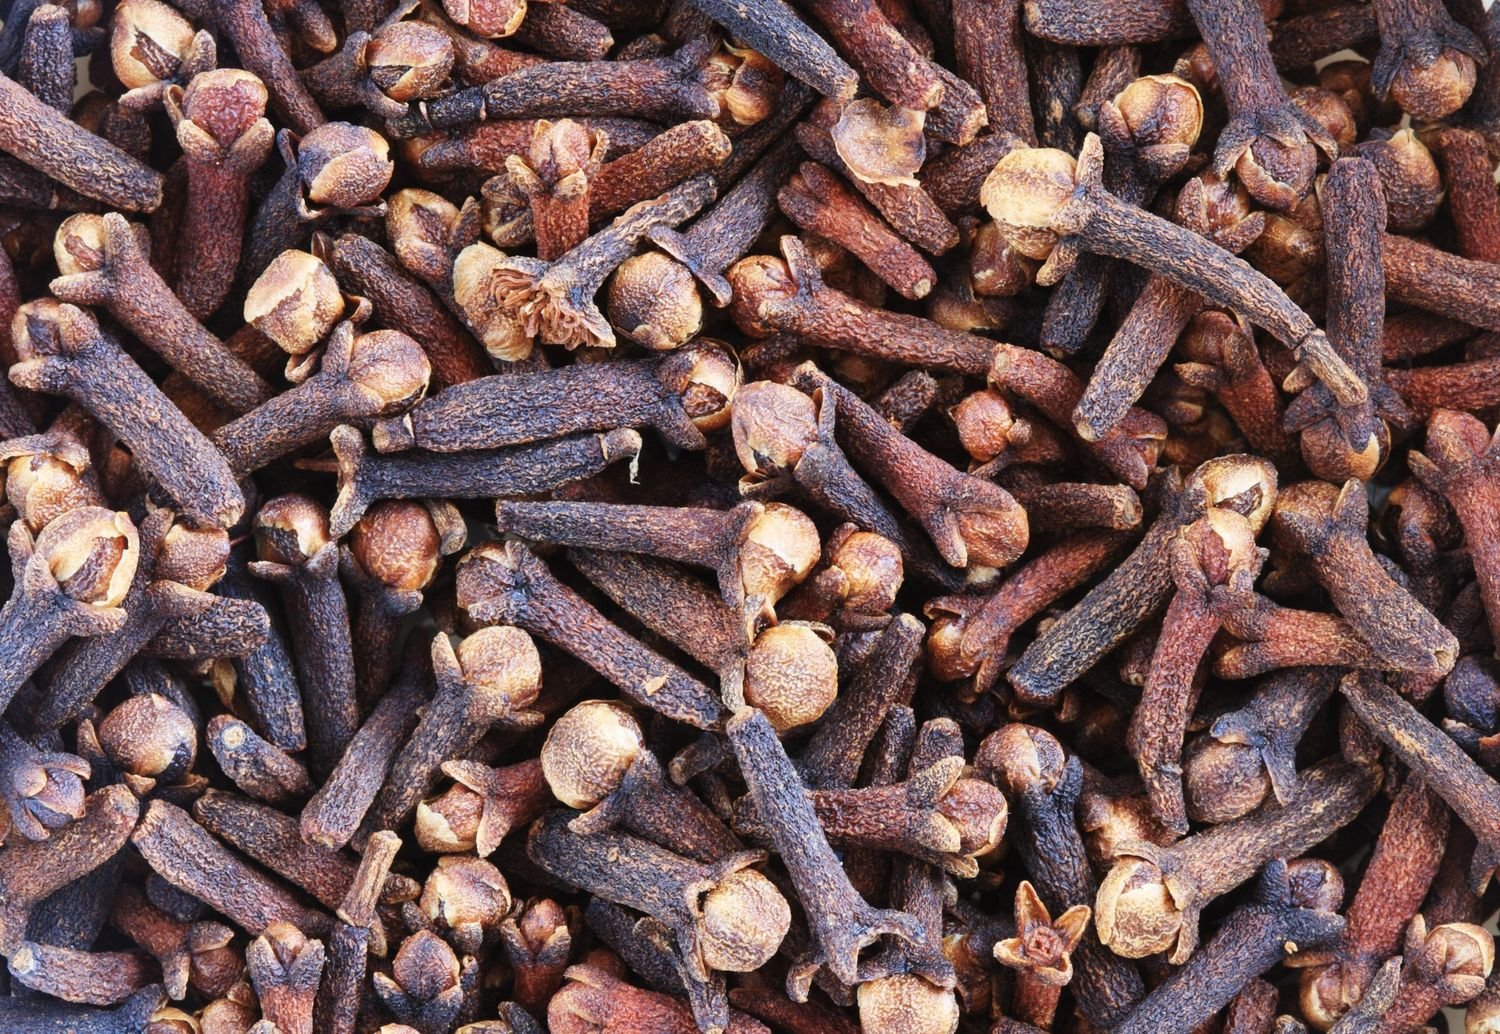 Clove Bud Pure Essential Oil Analysis Report